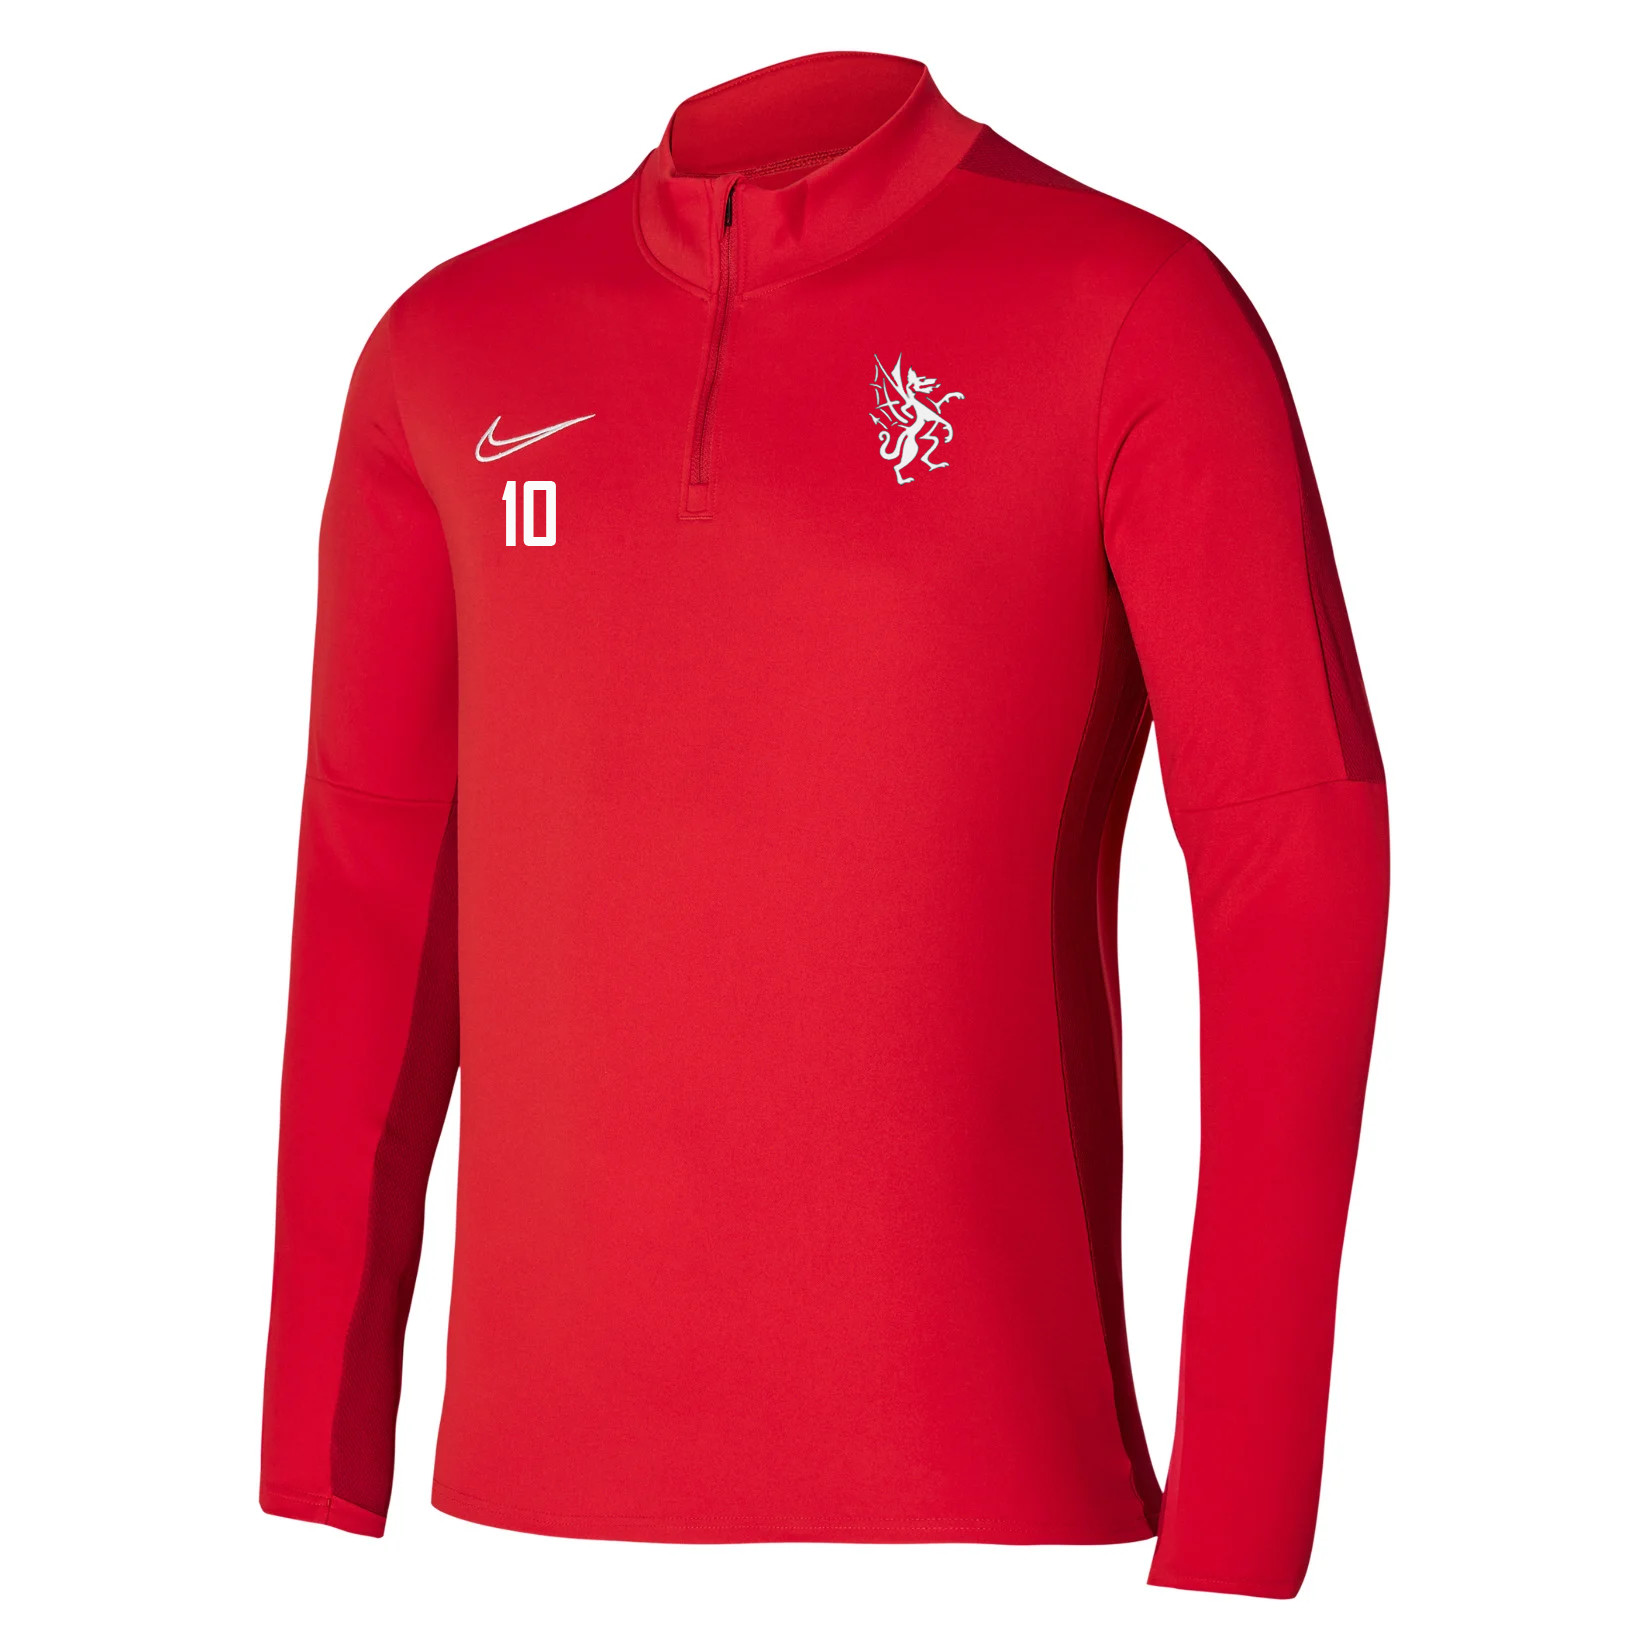 Nike Dri-Fit Academy 23 Drill Top University Red-Gym Red-White